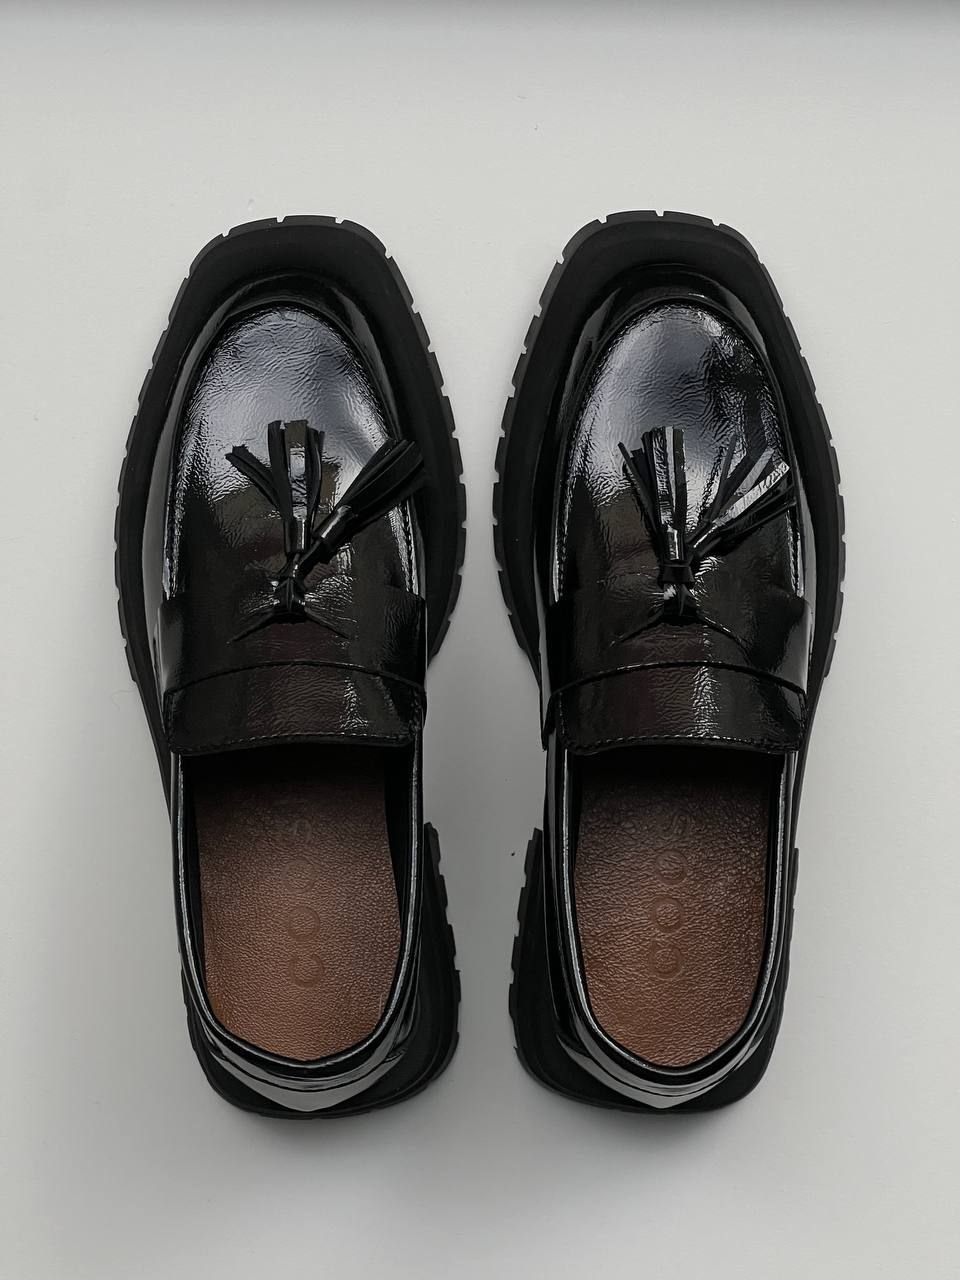 Tasseled Loafers in Patent Leather